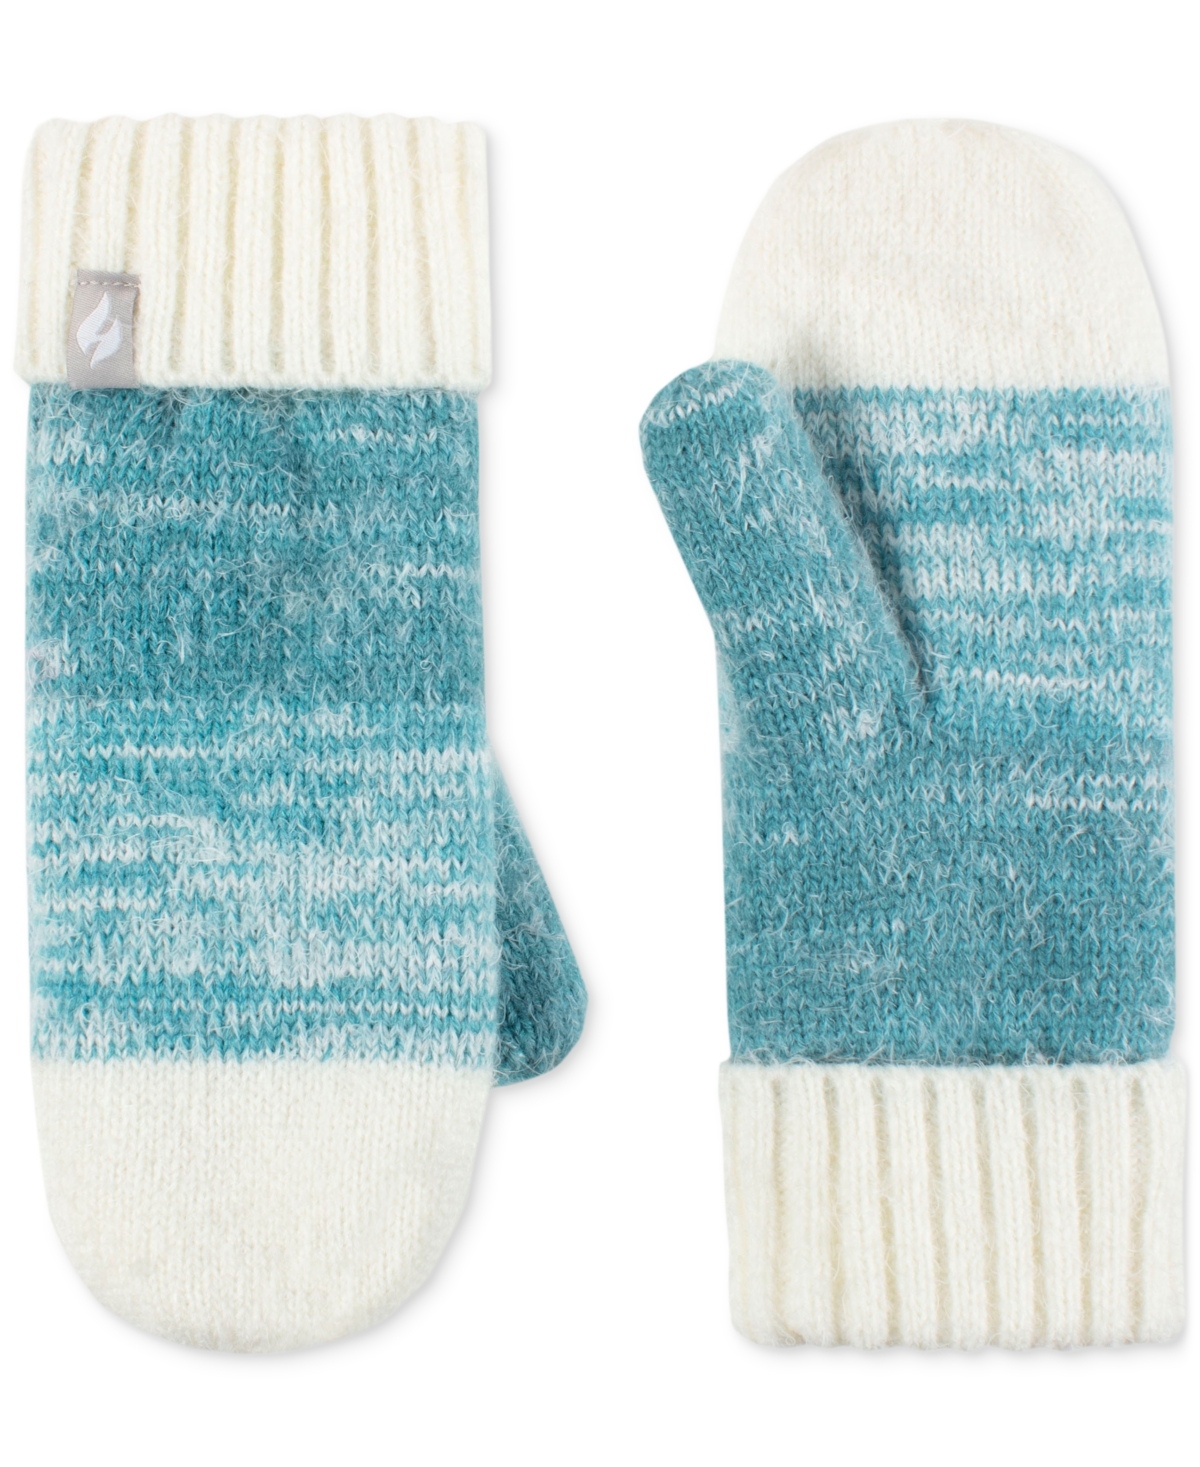 Sloane Feather Knit Mittens - Navy